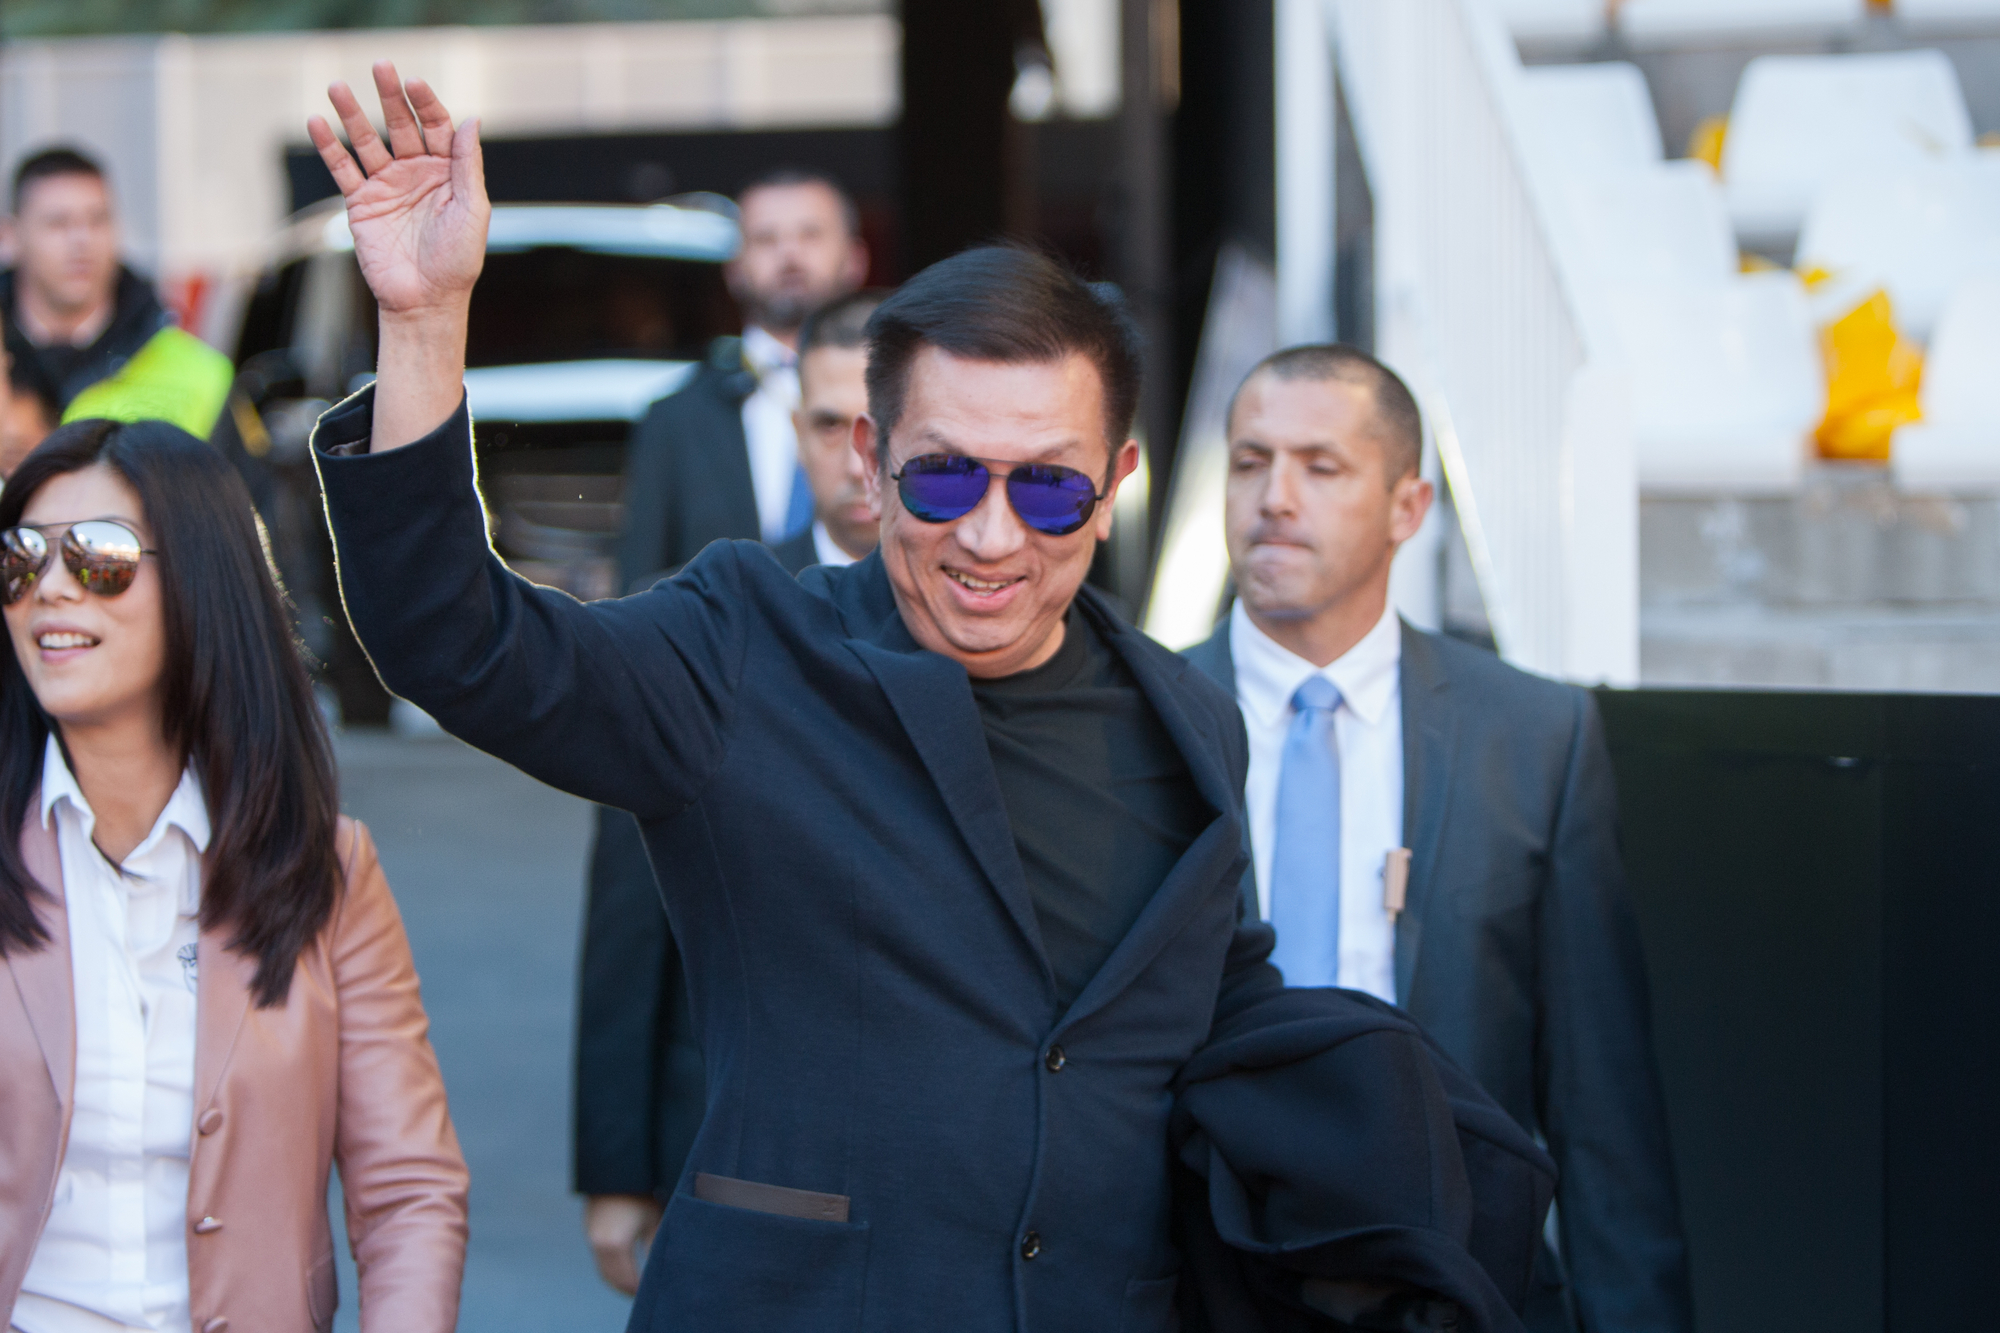 The great mistakes of Peter Lim in Valencia